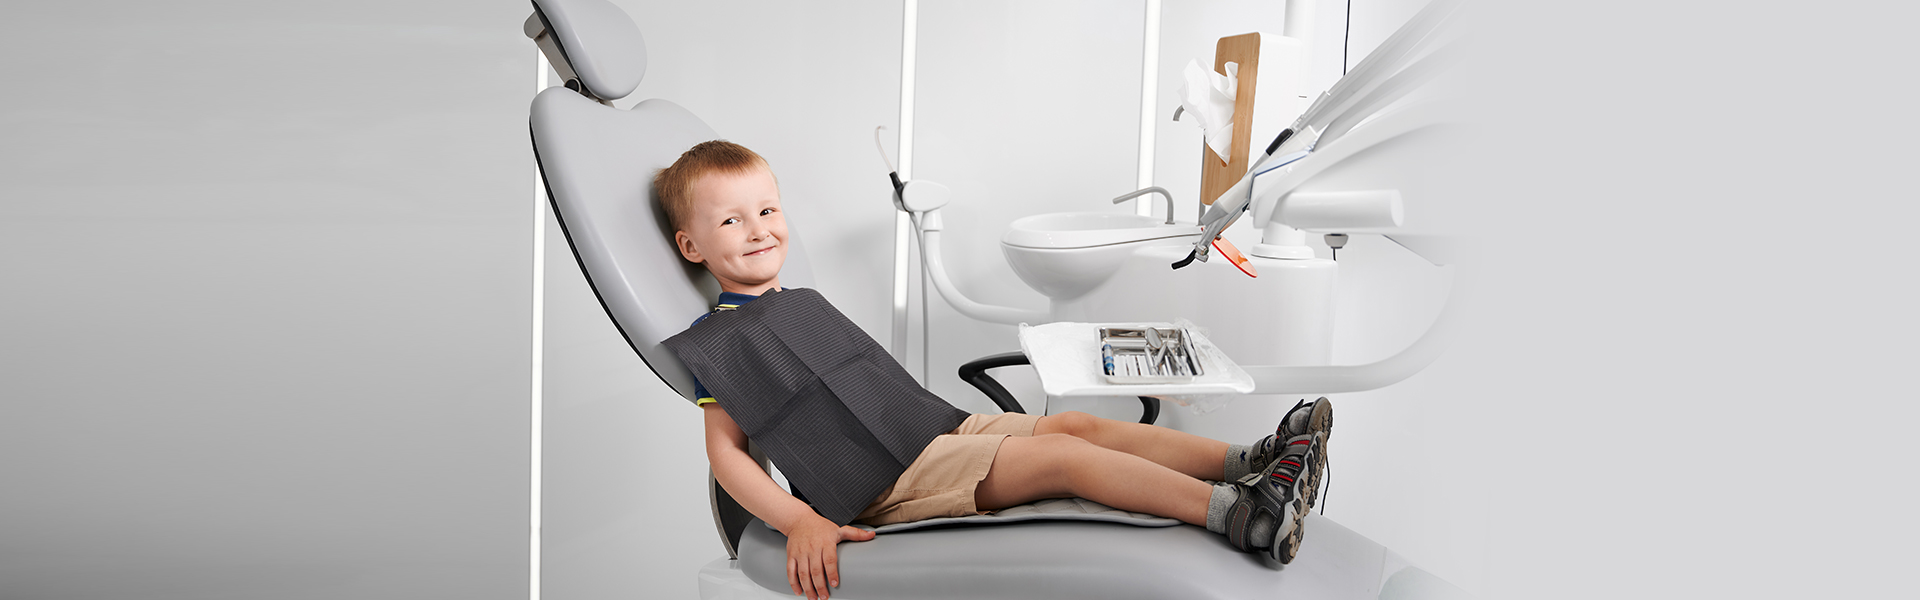 Pediatric Dentistry 101: The Only Guide You Need